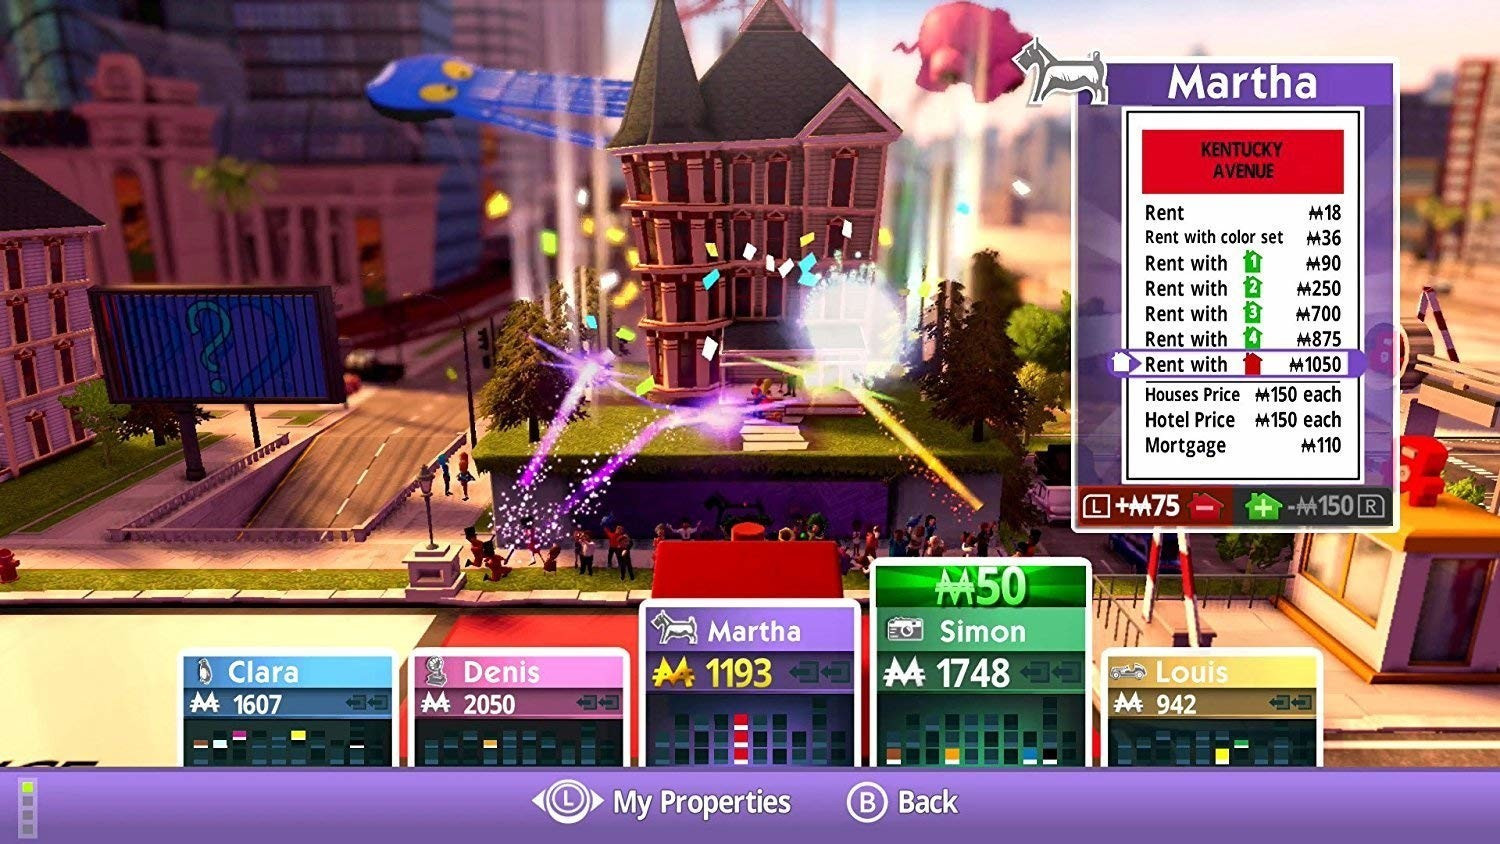 Monopoly for Nintendo Switch Review